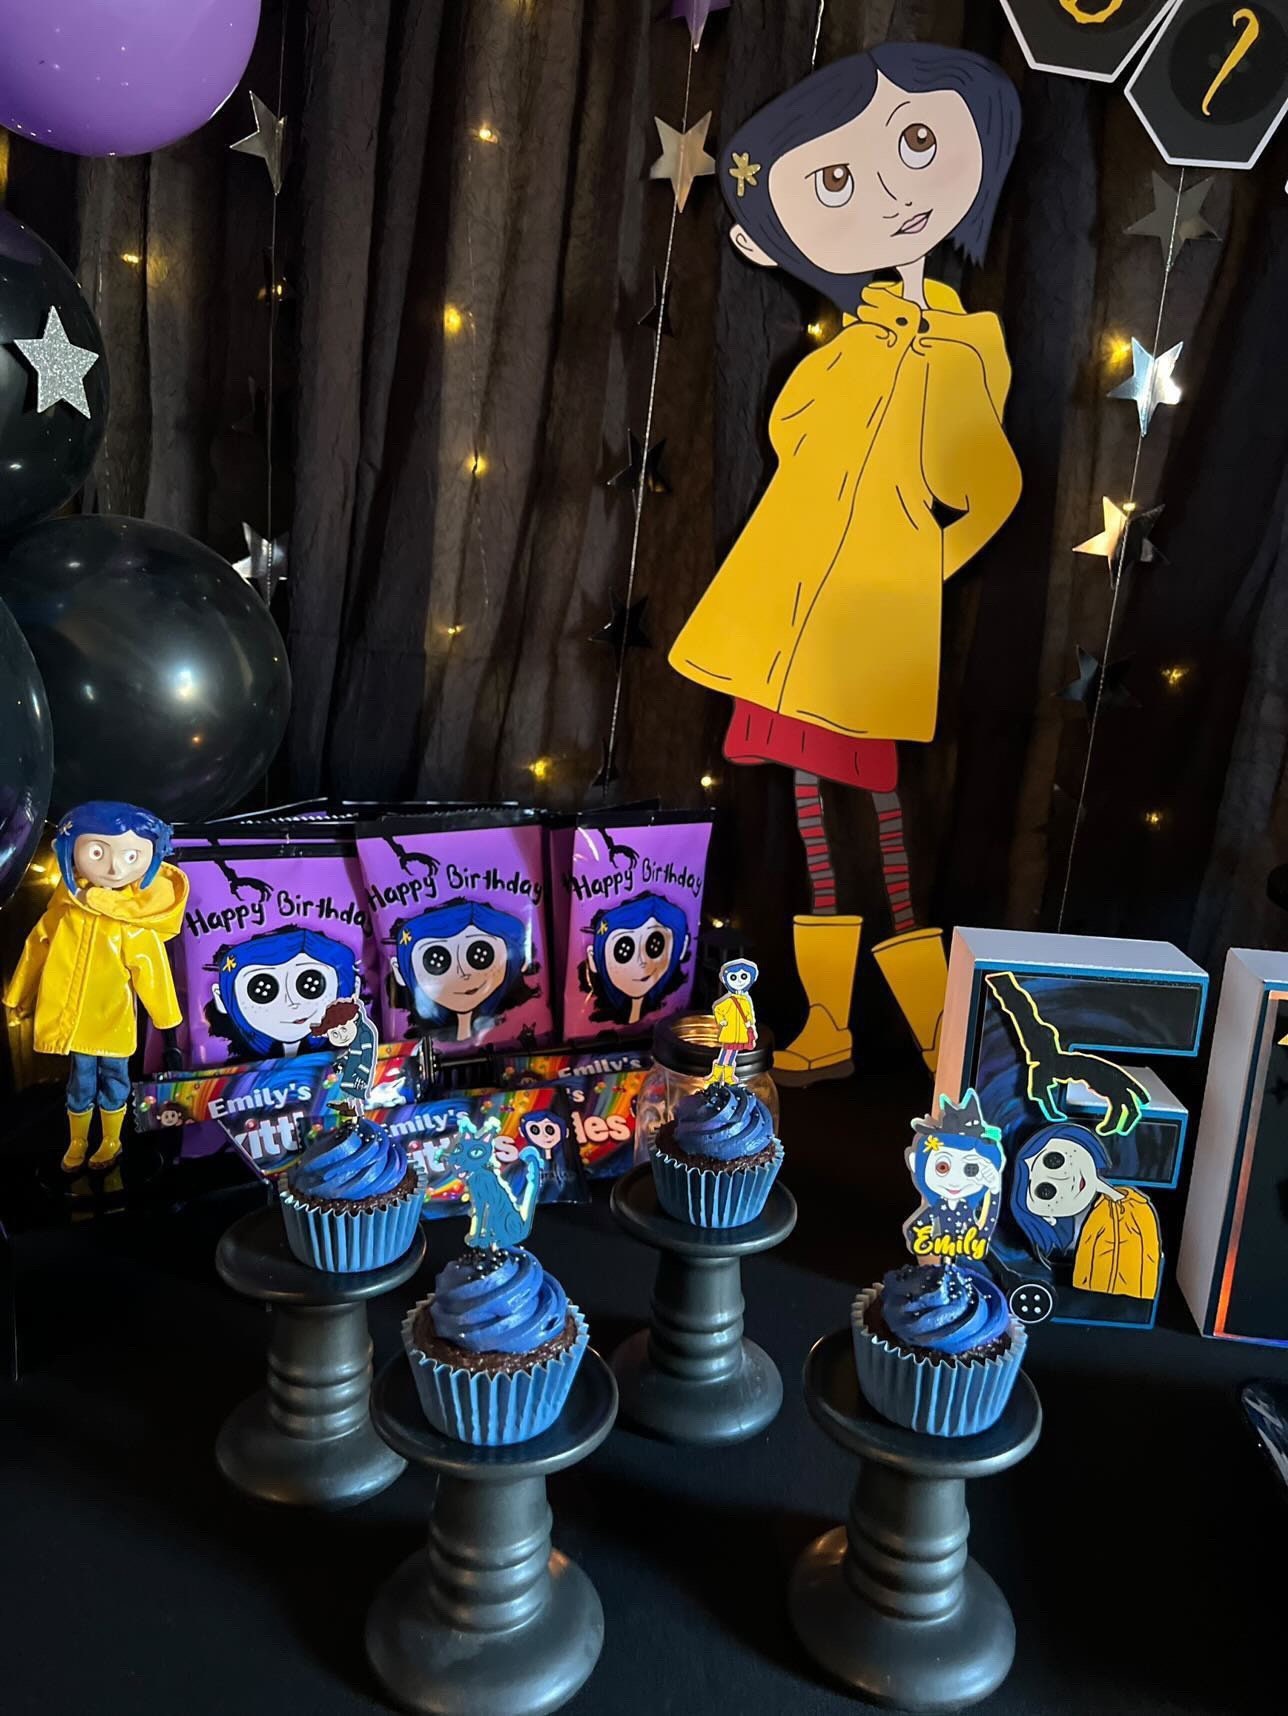 Coraline Party Decorations  Toddler birthday party themes